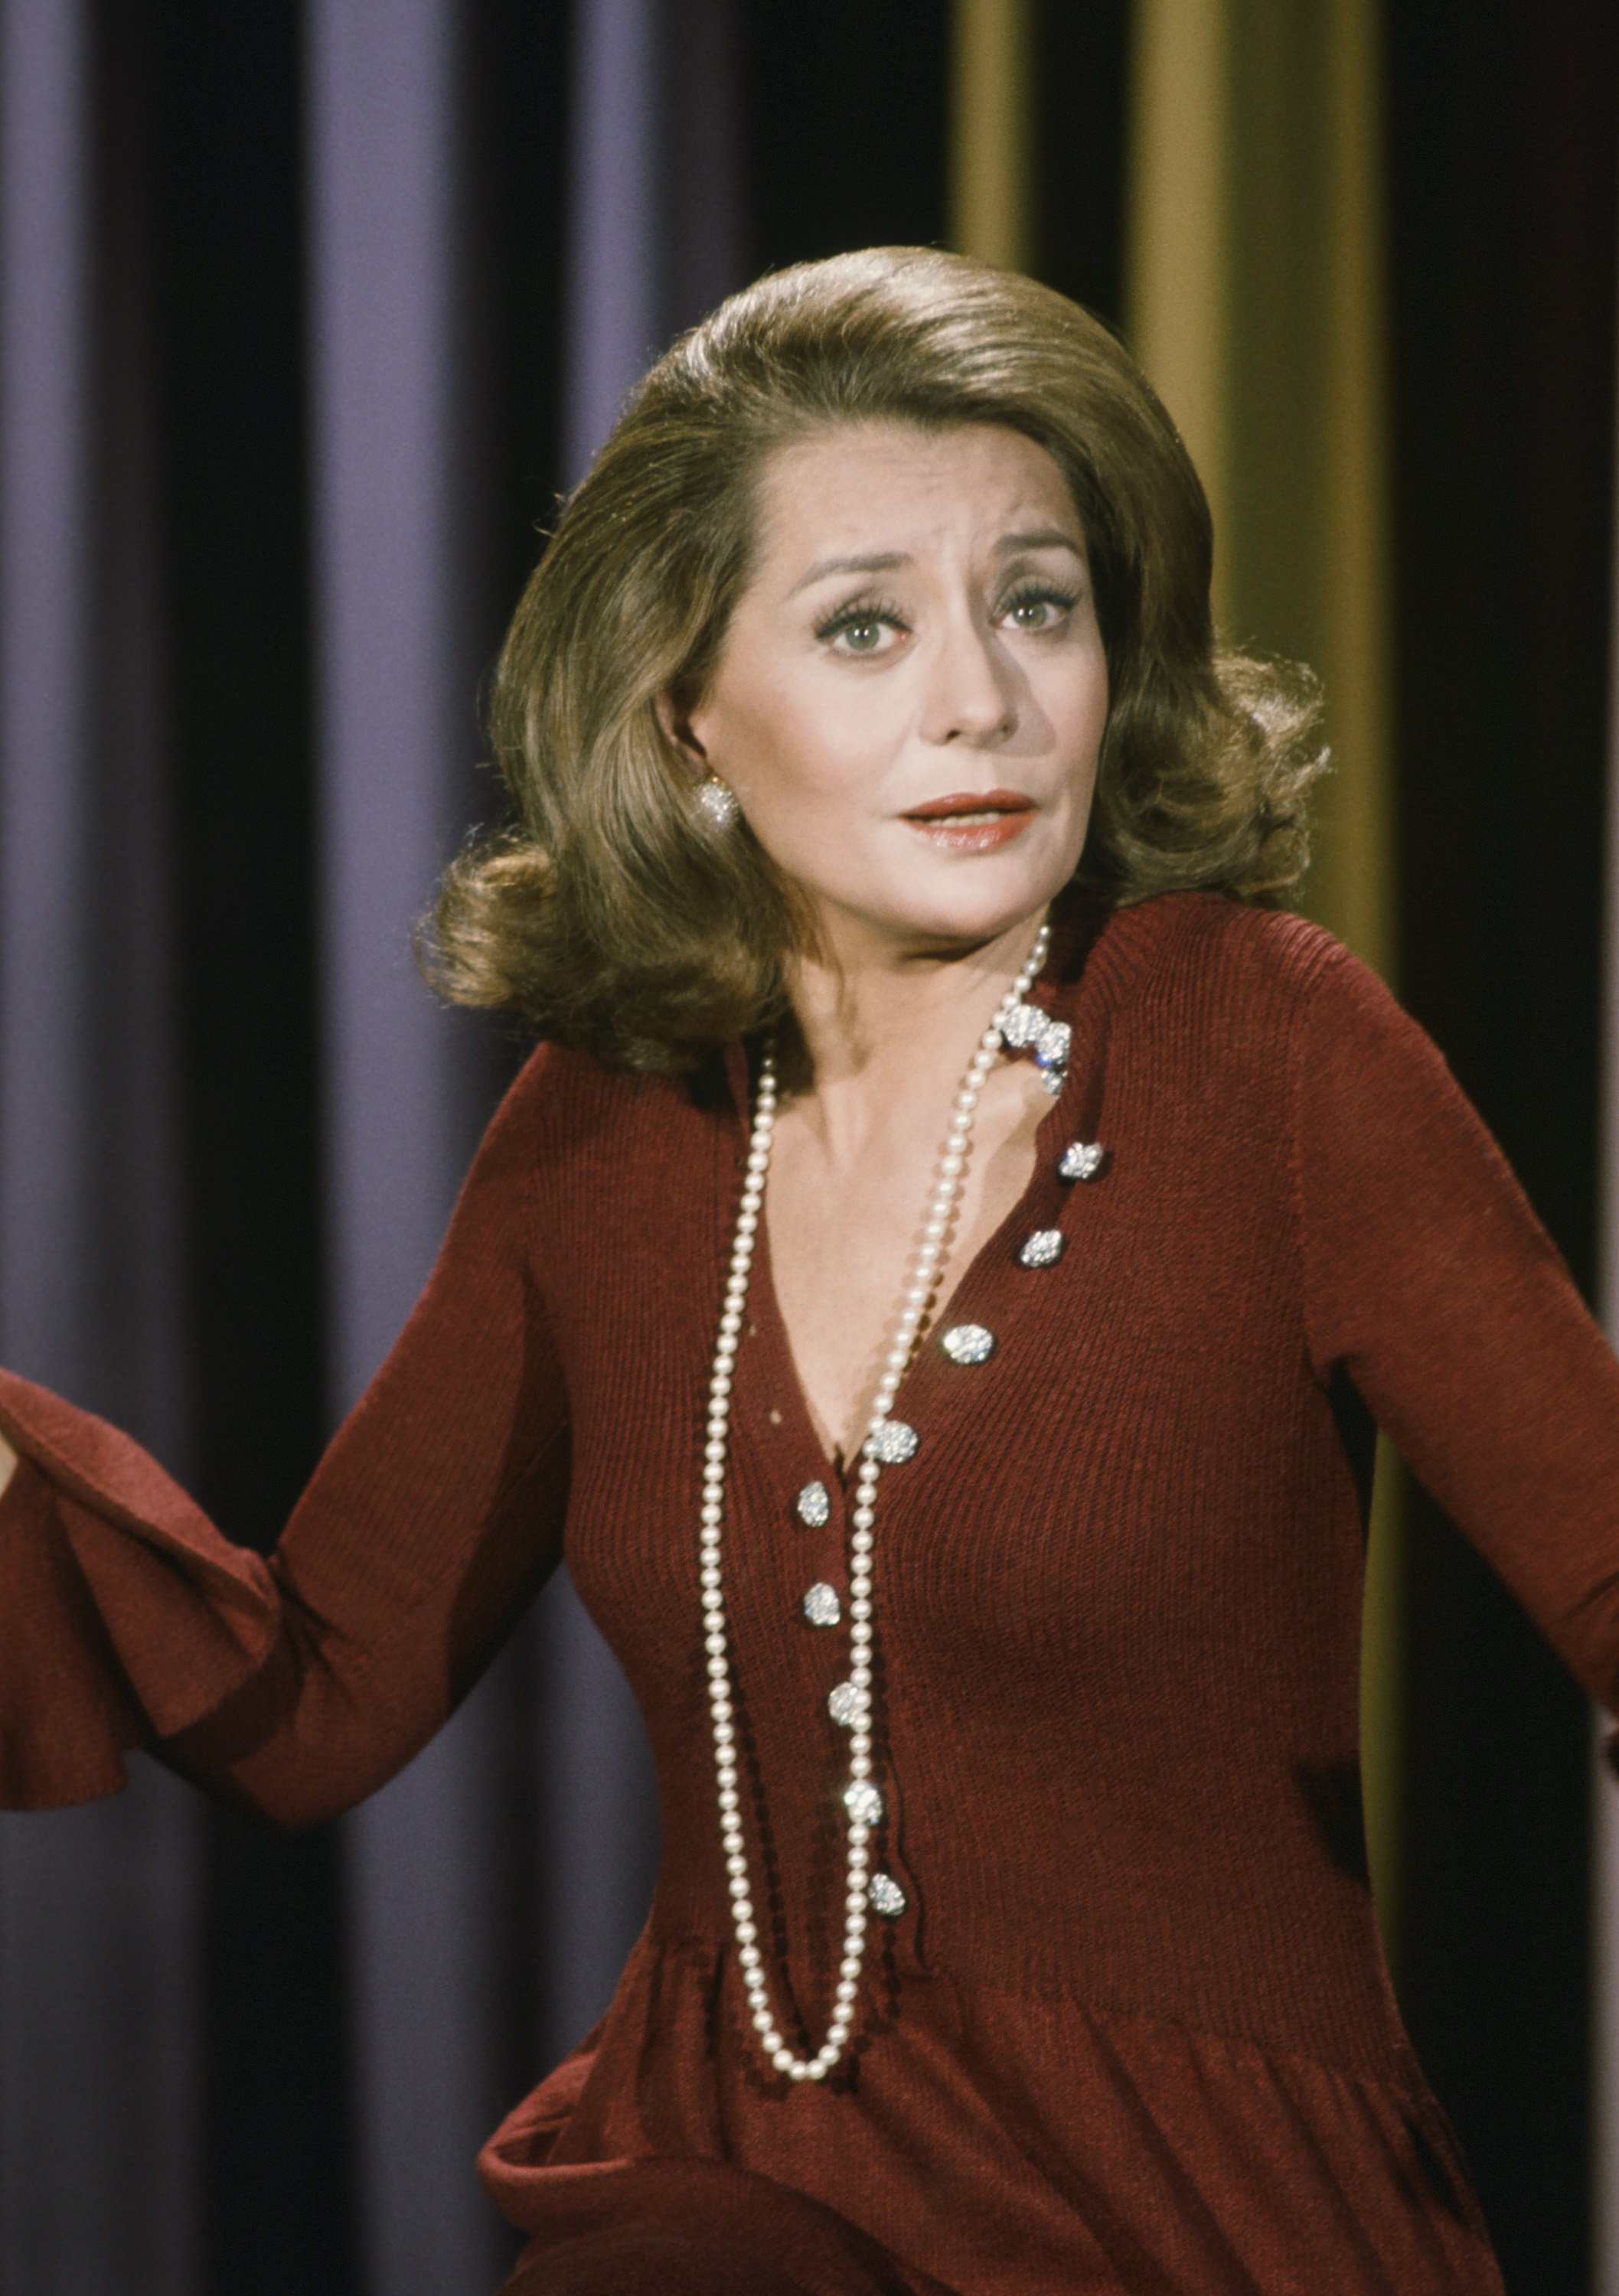 Barbara Walters as a guest host on "The Tonight Show Starring Johnny Carson" on October 22, 1973  ┃Source: Getty Images